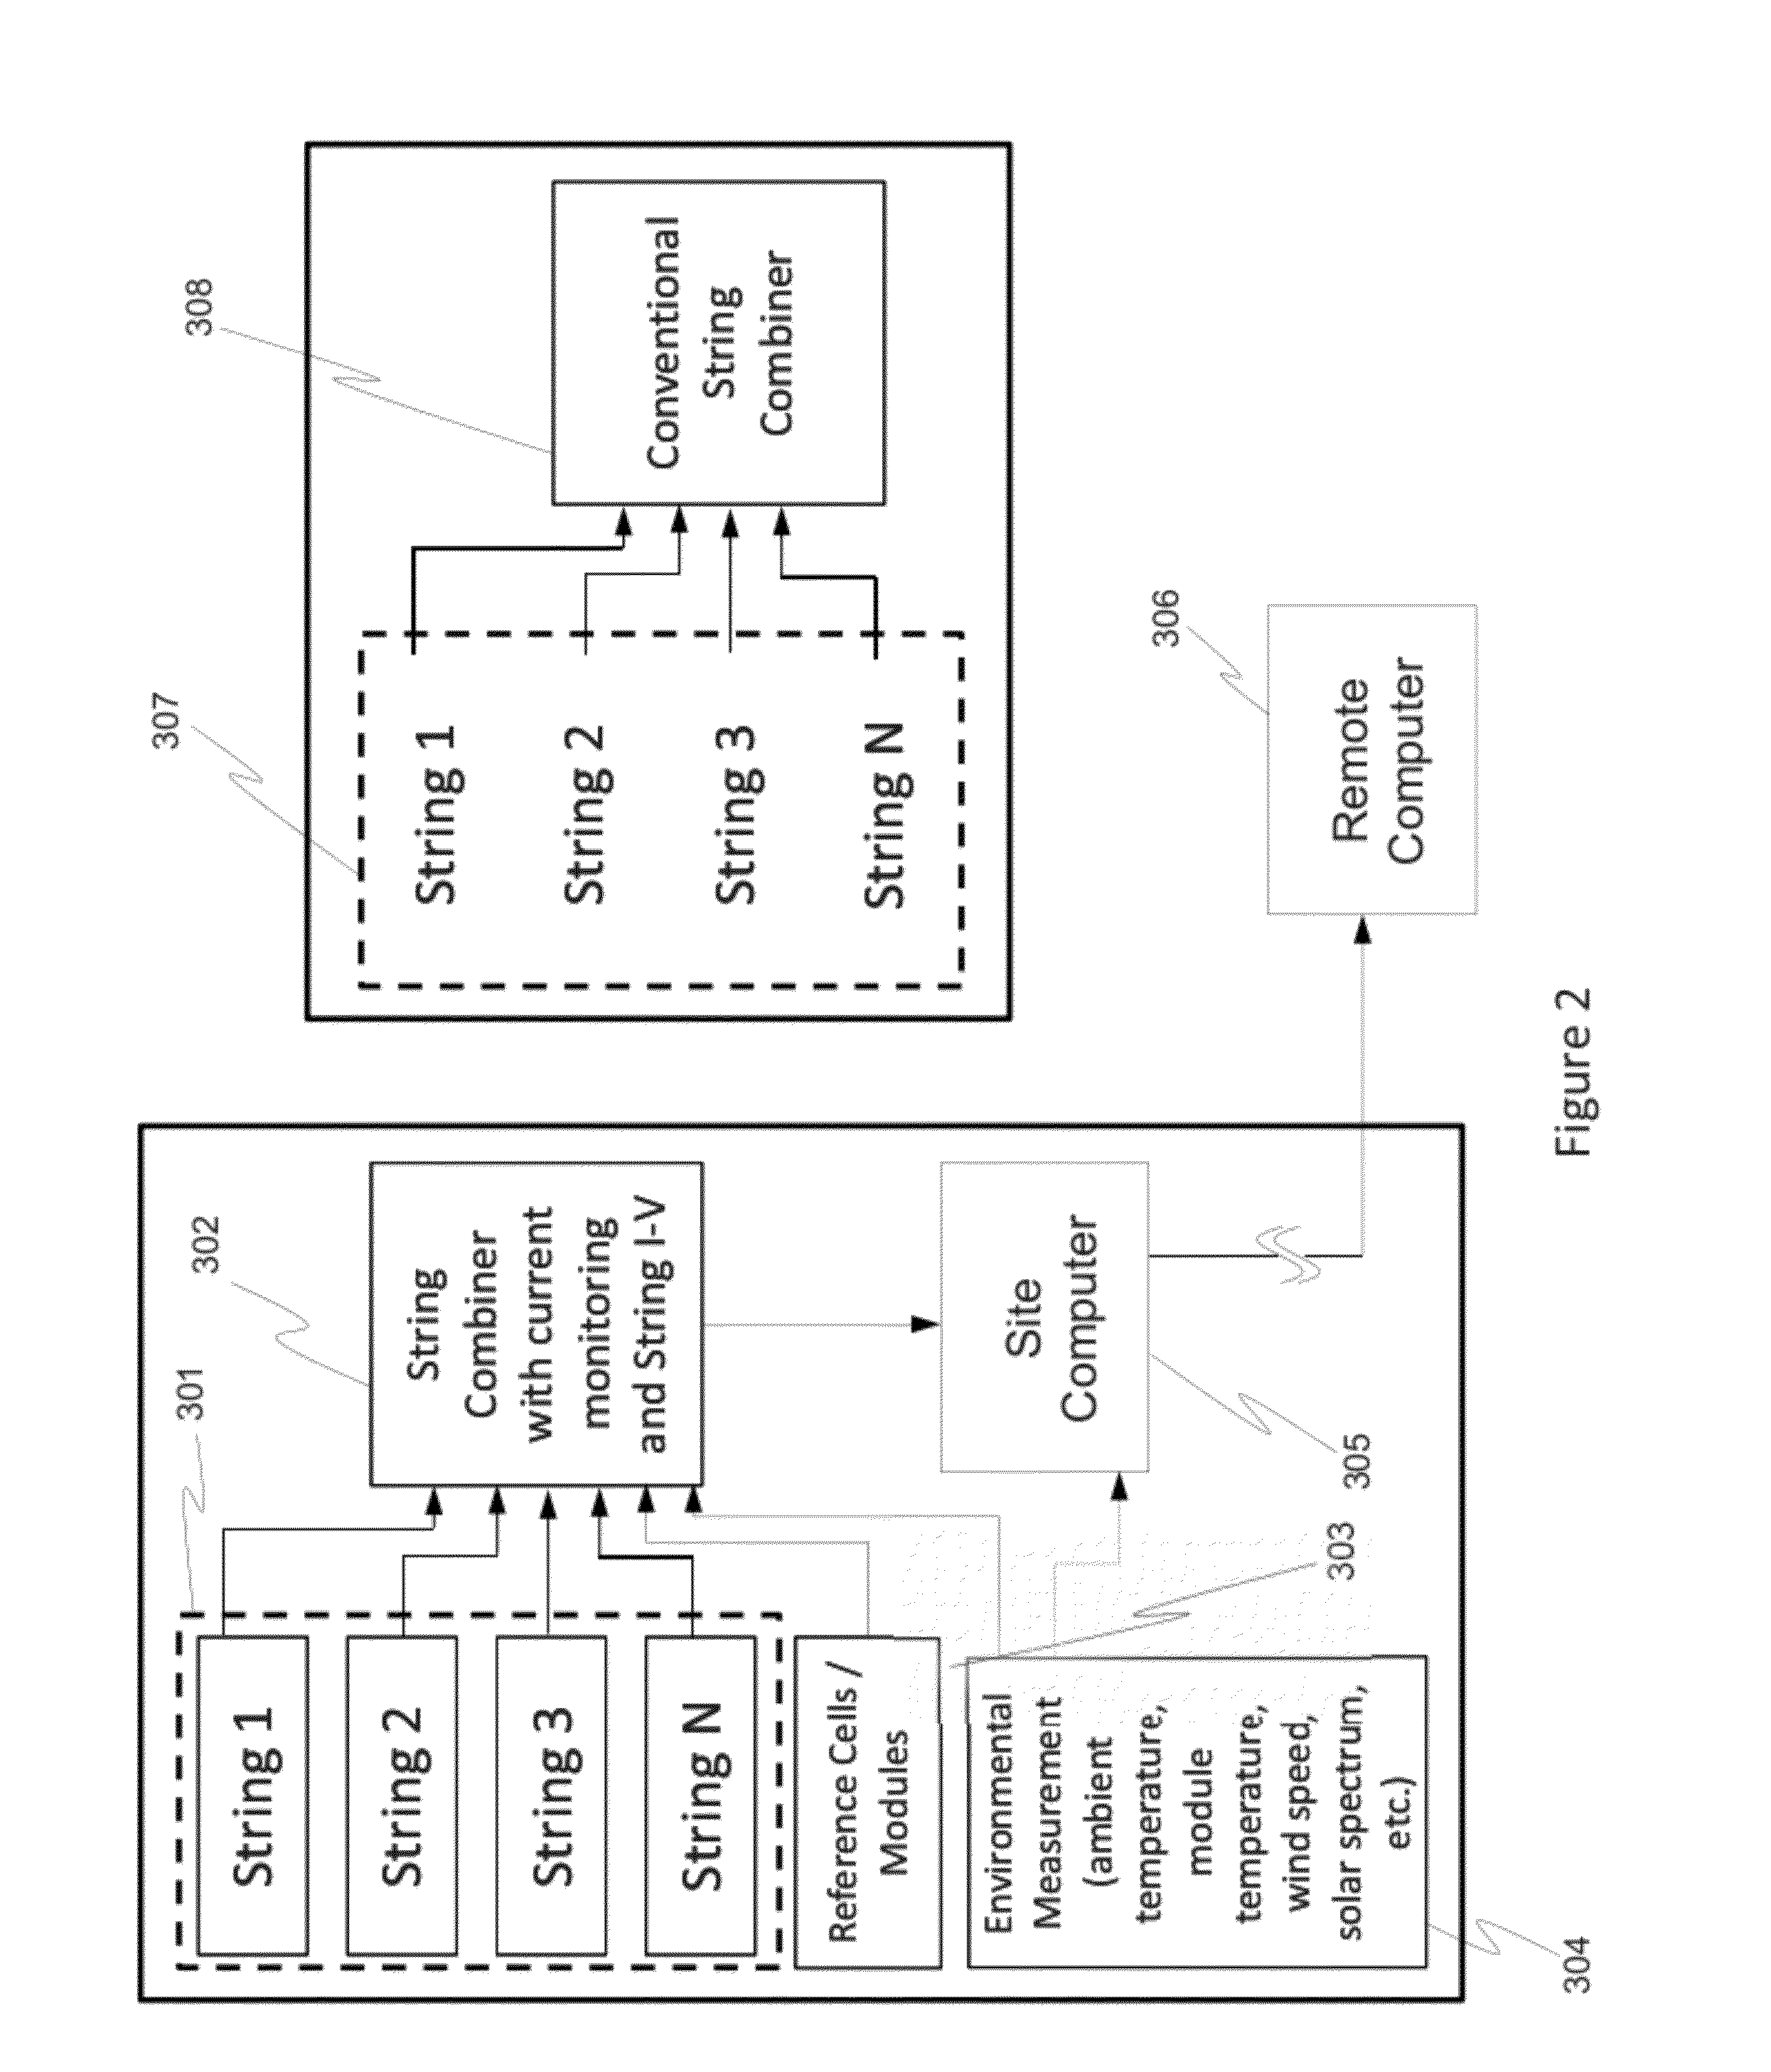 System and methods for high-precision string-level measurement of photovoltaic array performance